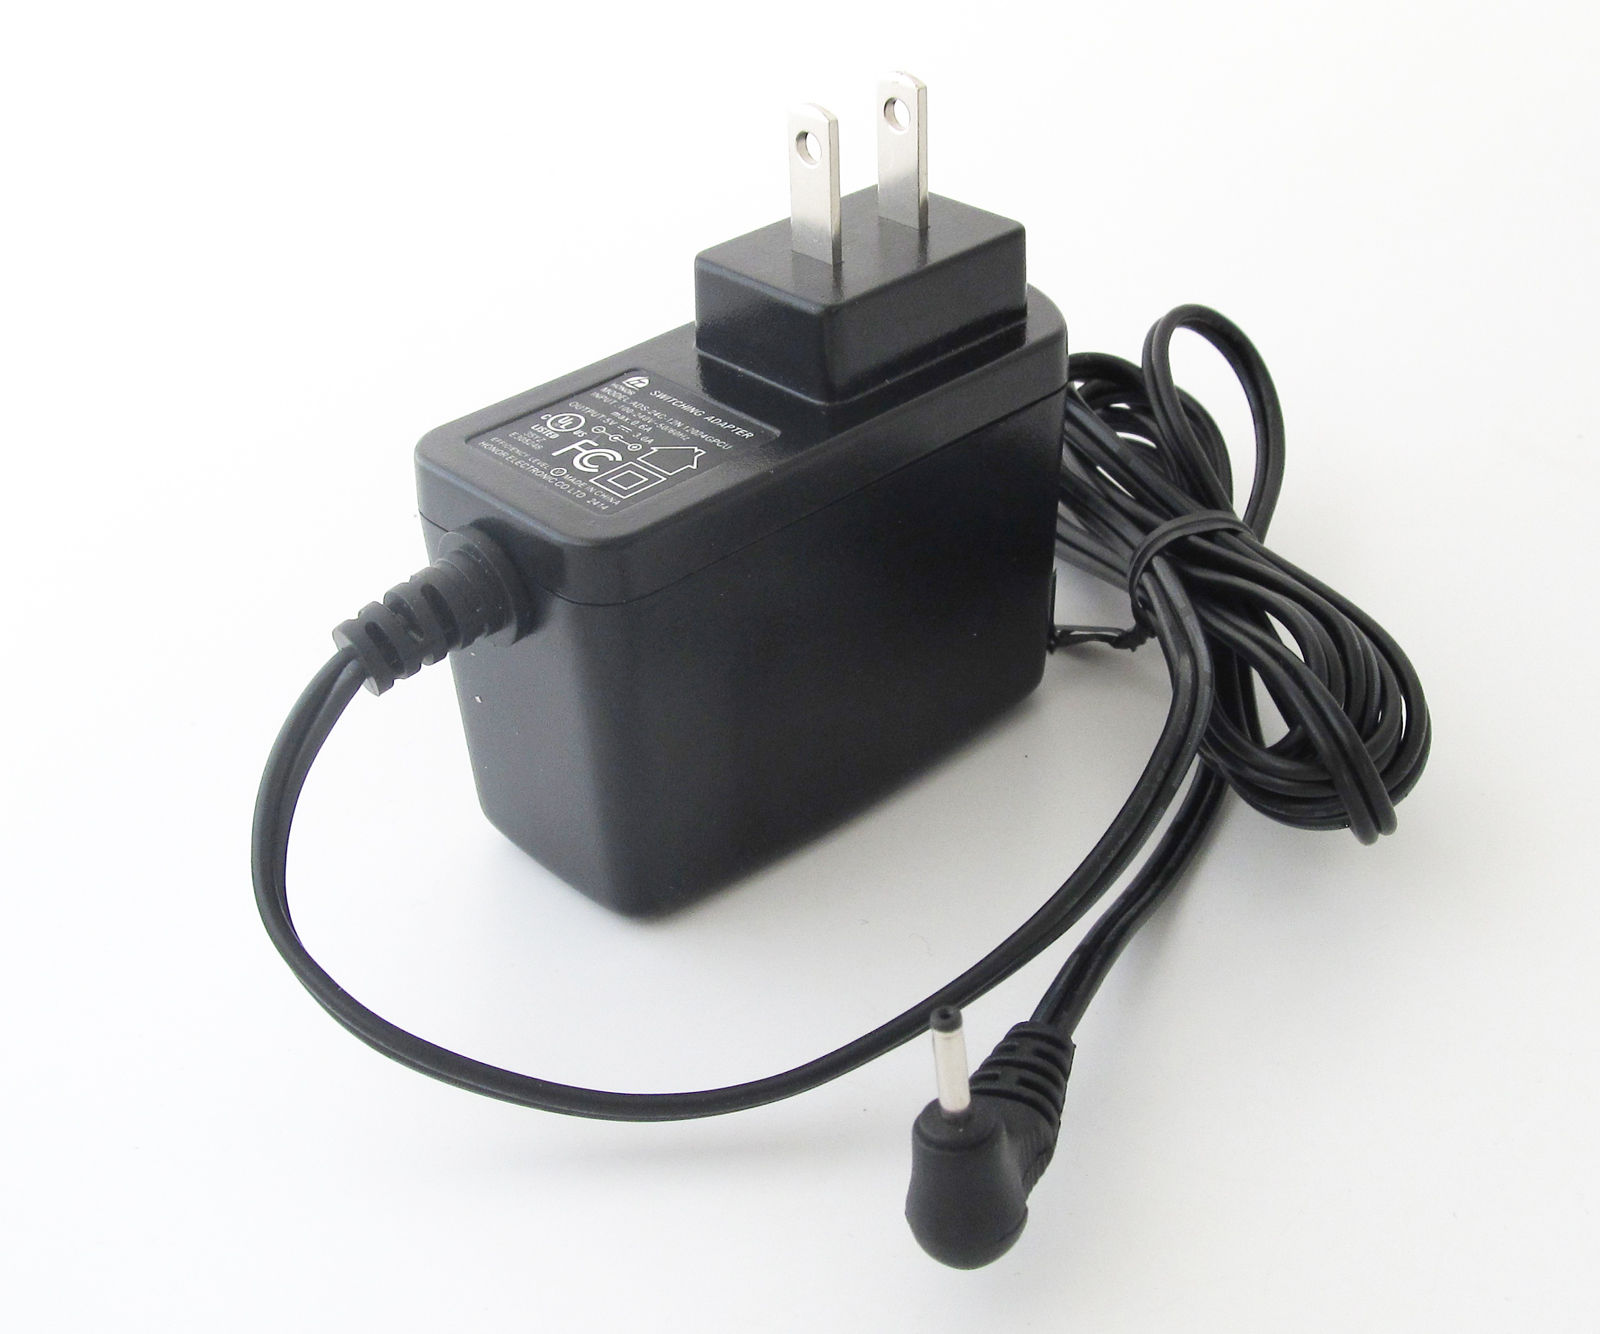 New HONOR ADS-24C-12N 5V 3.0A 120224GPCU SWITCHING AC/DC power adapter